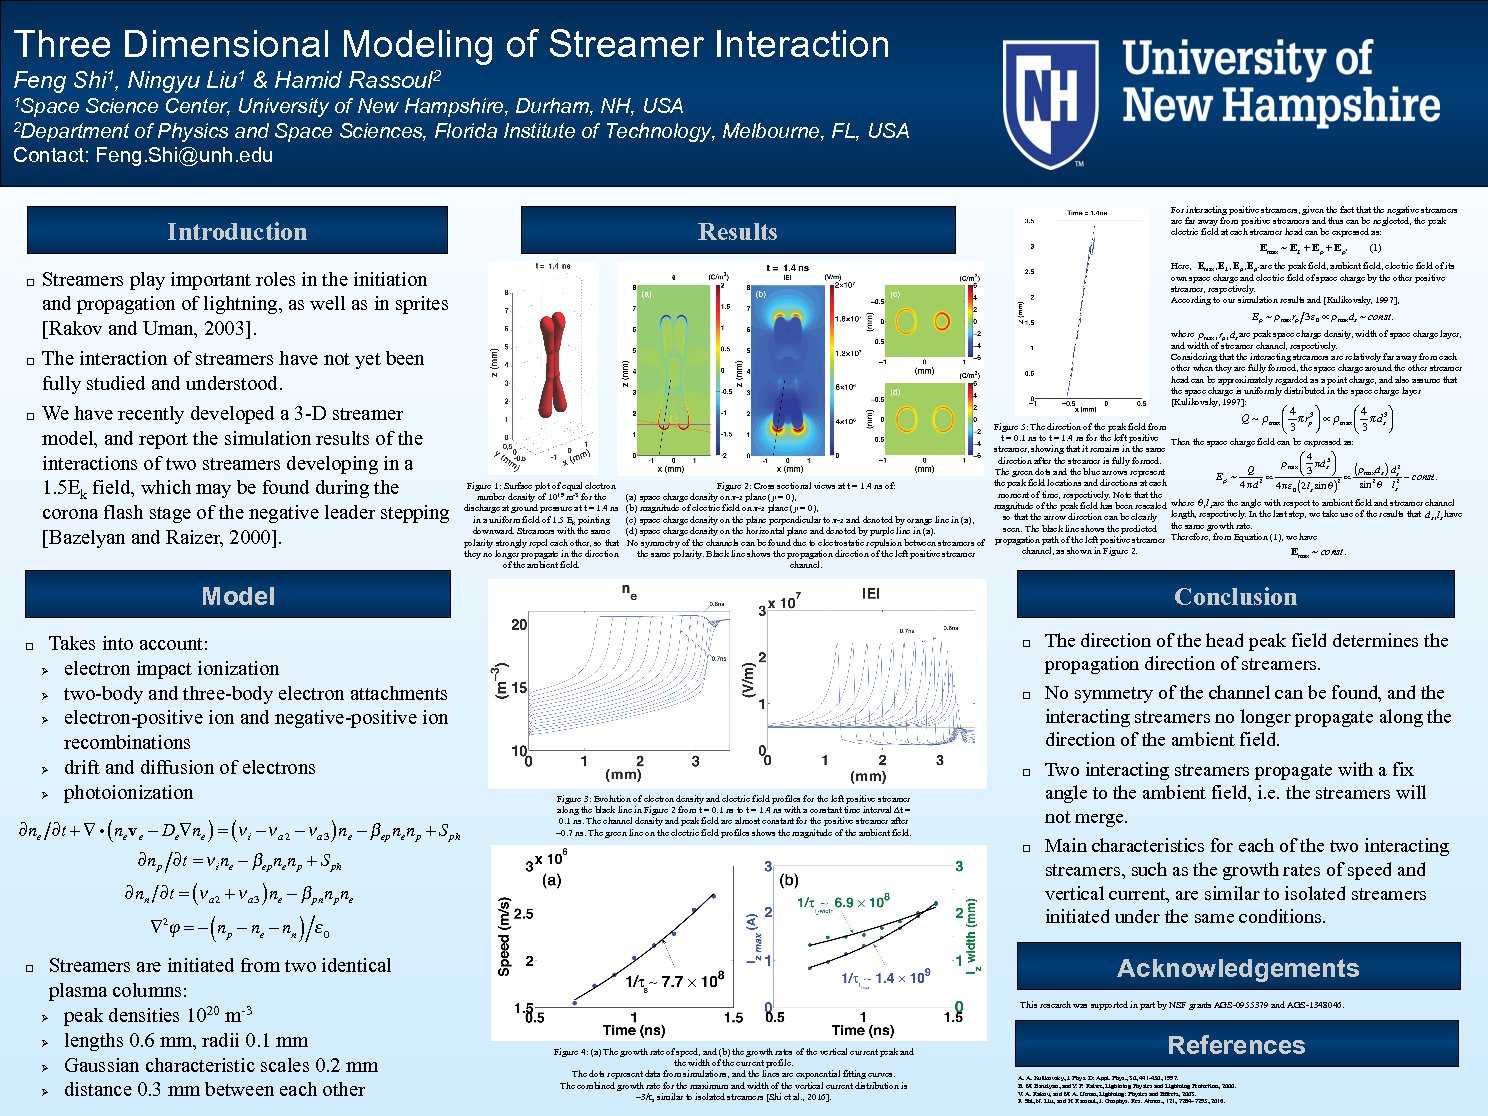 Three Dimensional Modeling Of Streamer Interaction by fs1036